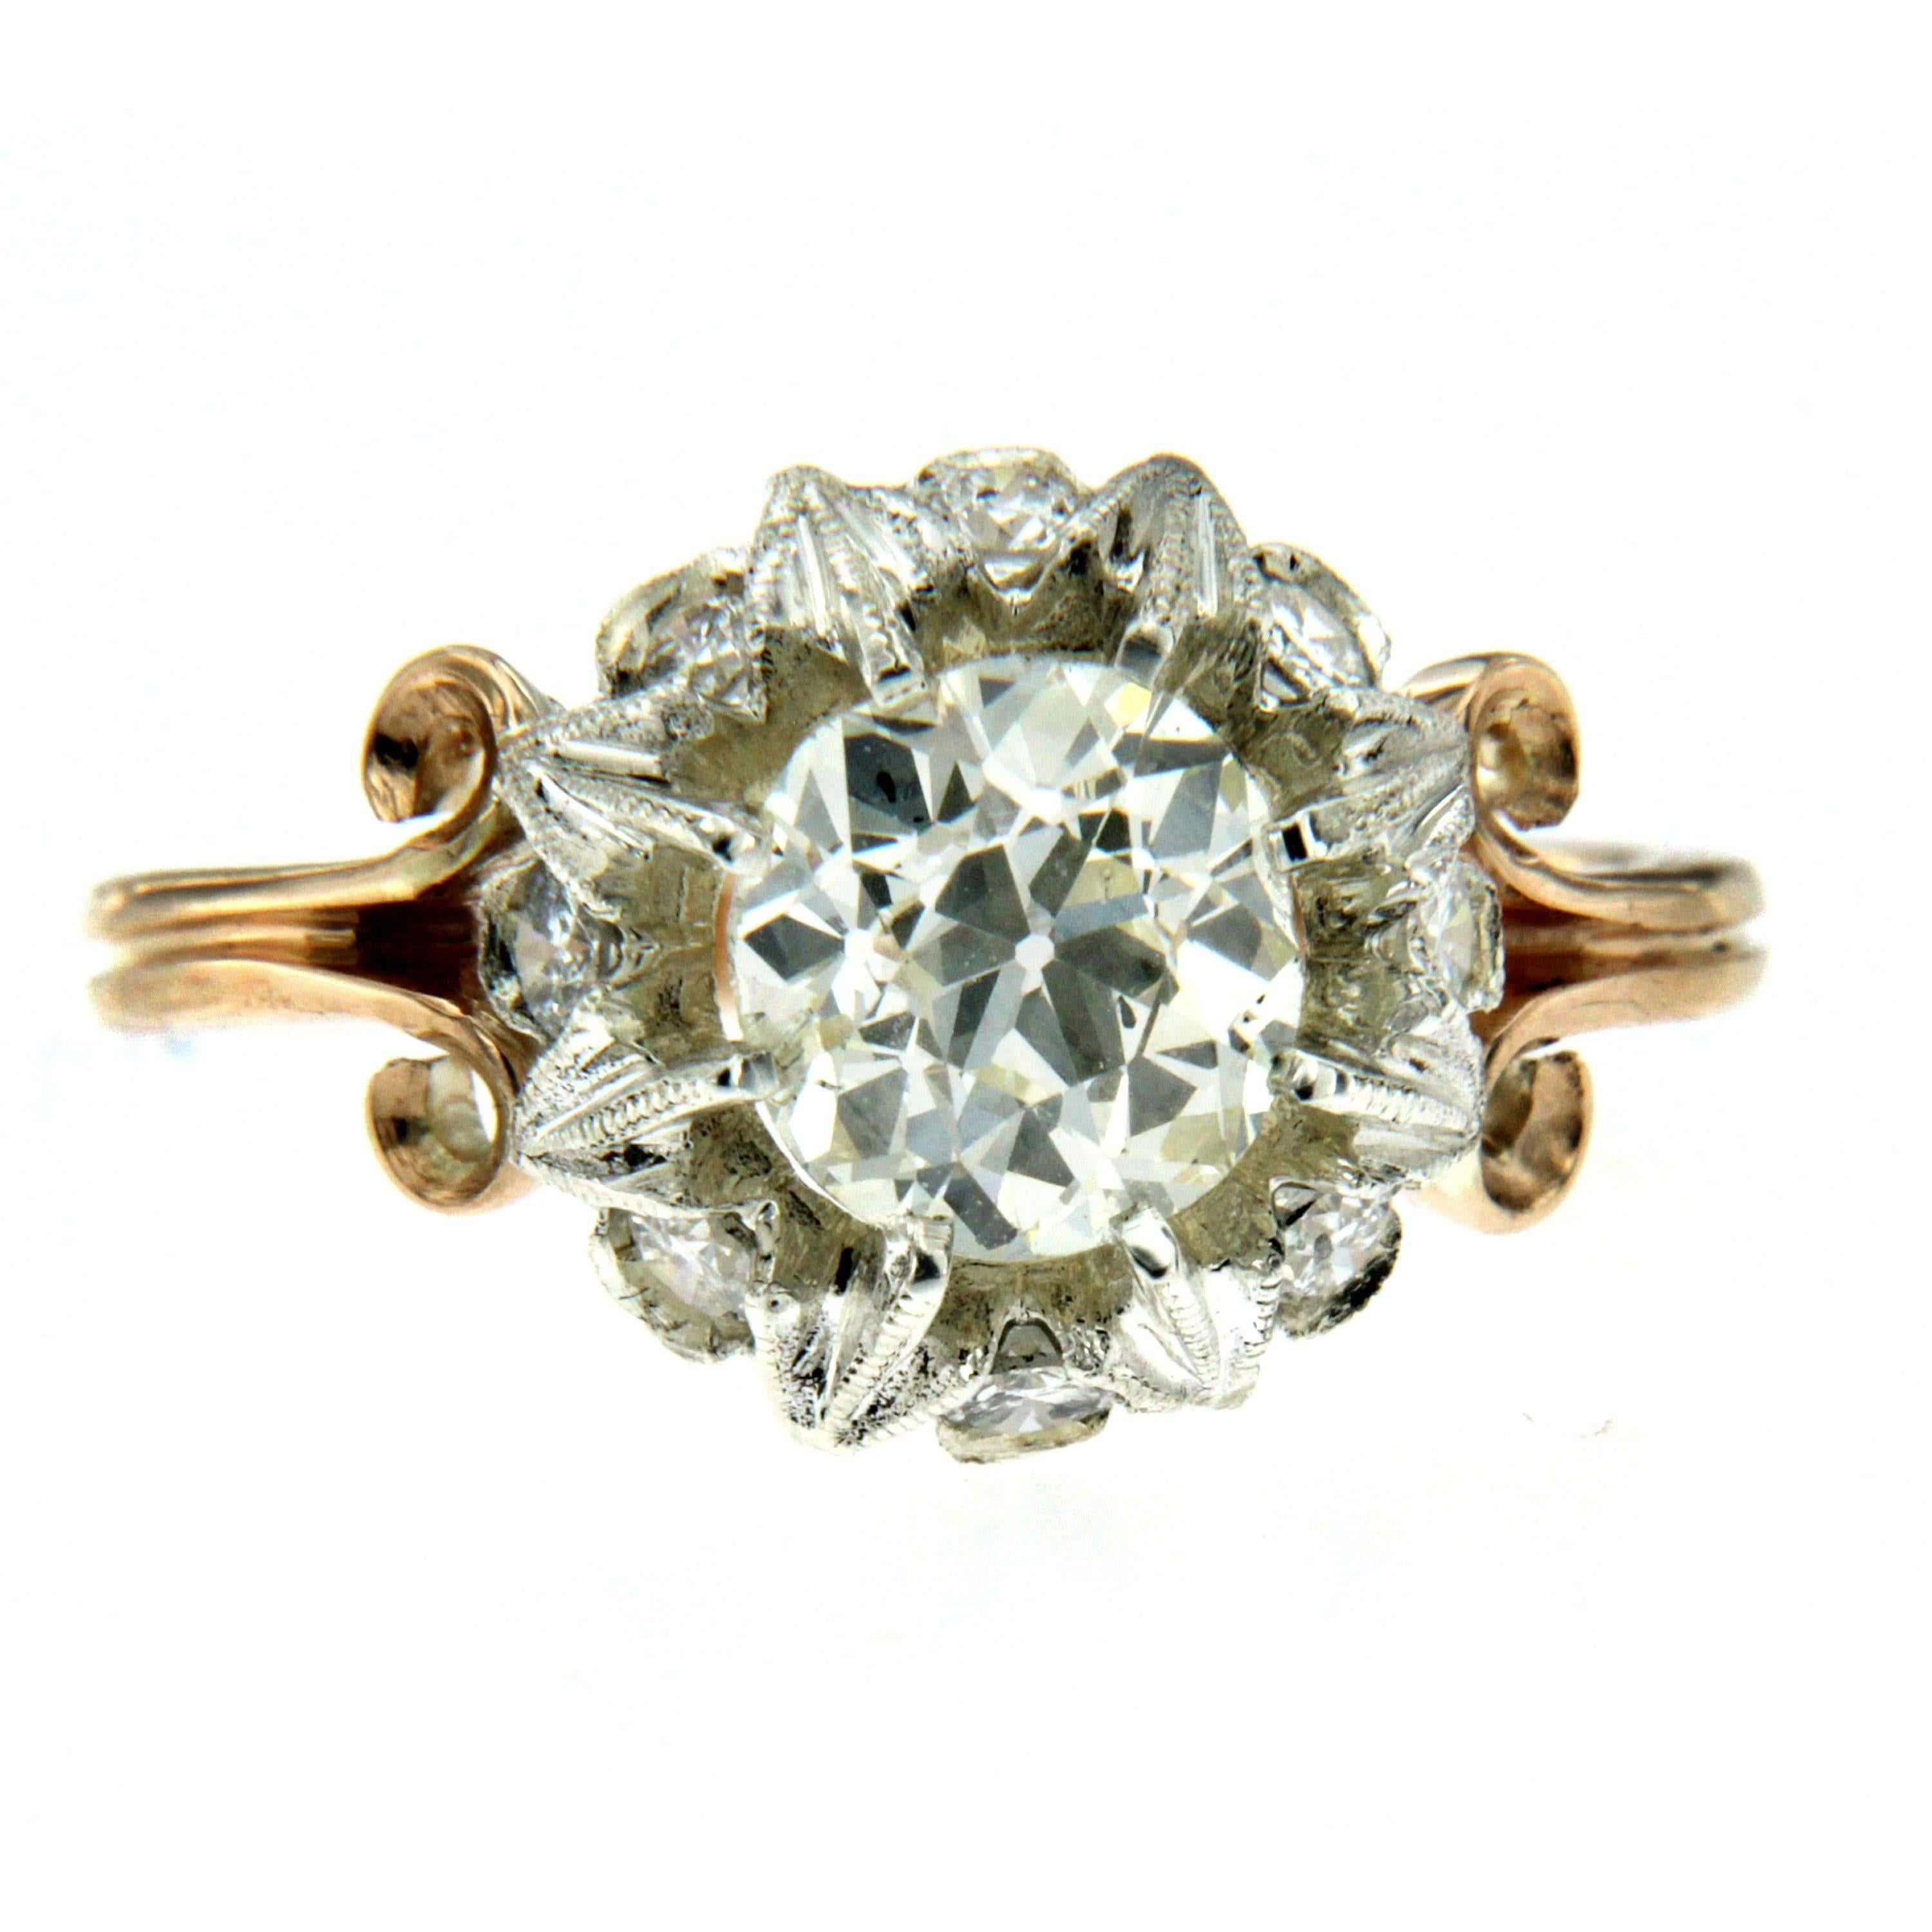 A beautiful original and unique Art Noveau diamond engagement ring set in 18K yellow and white gold hand worked into a gorgeous blooming flower. The ring features a center 1.40 carat old mine cut diamond M color Vvs, 
Framing the center diamond are